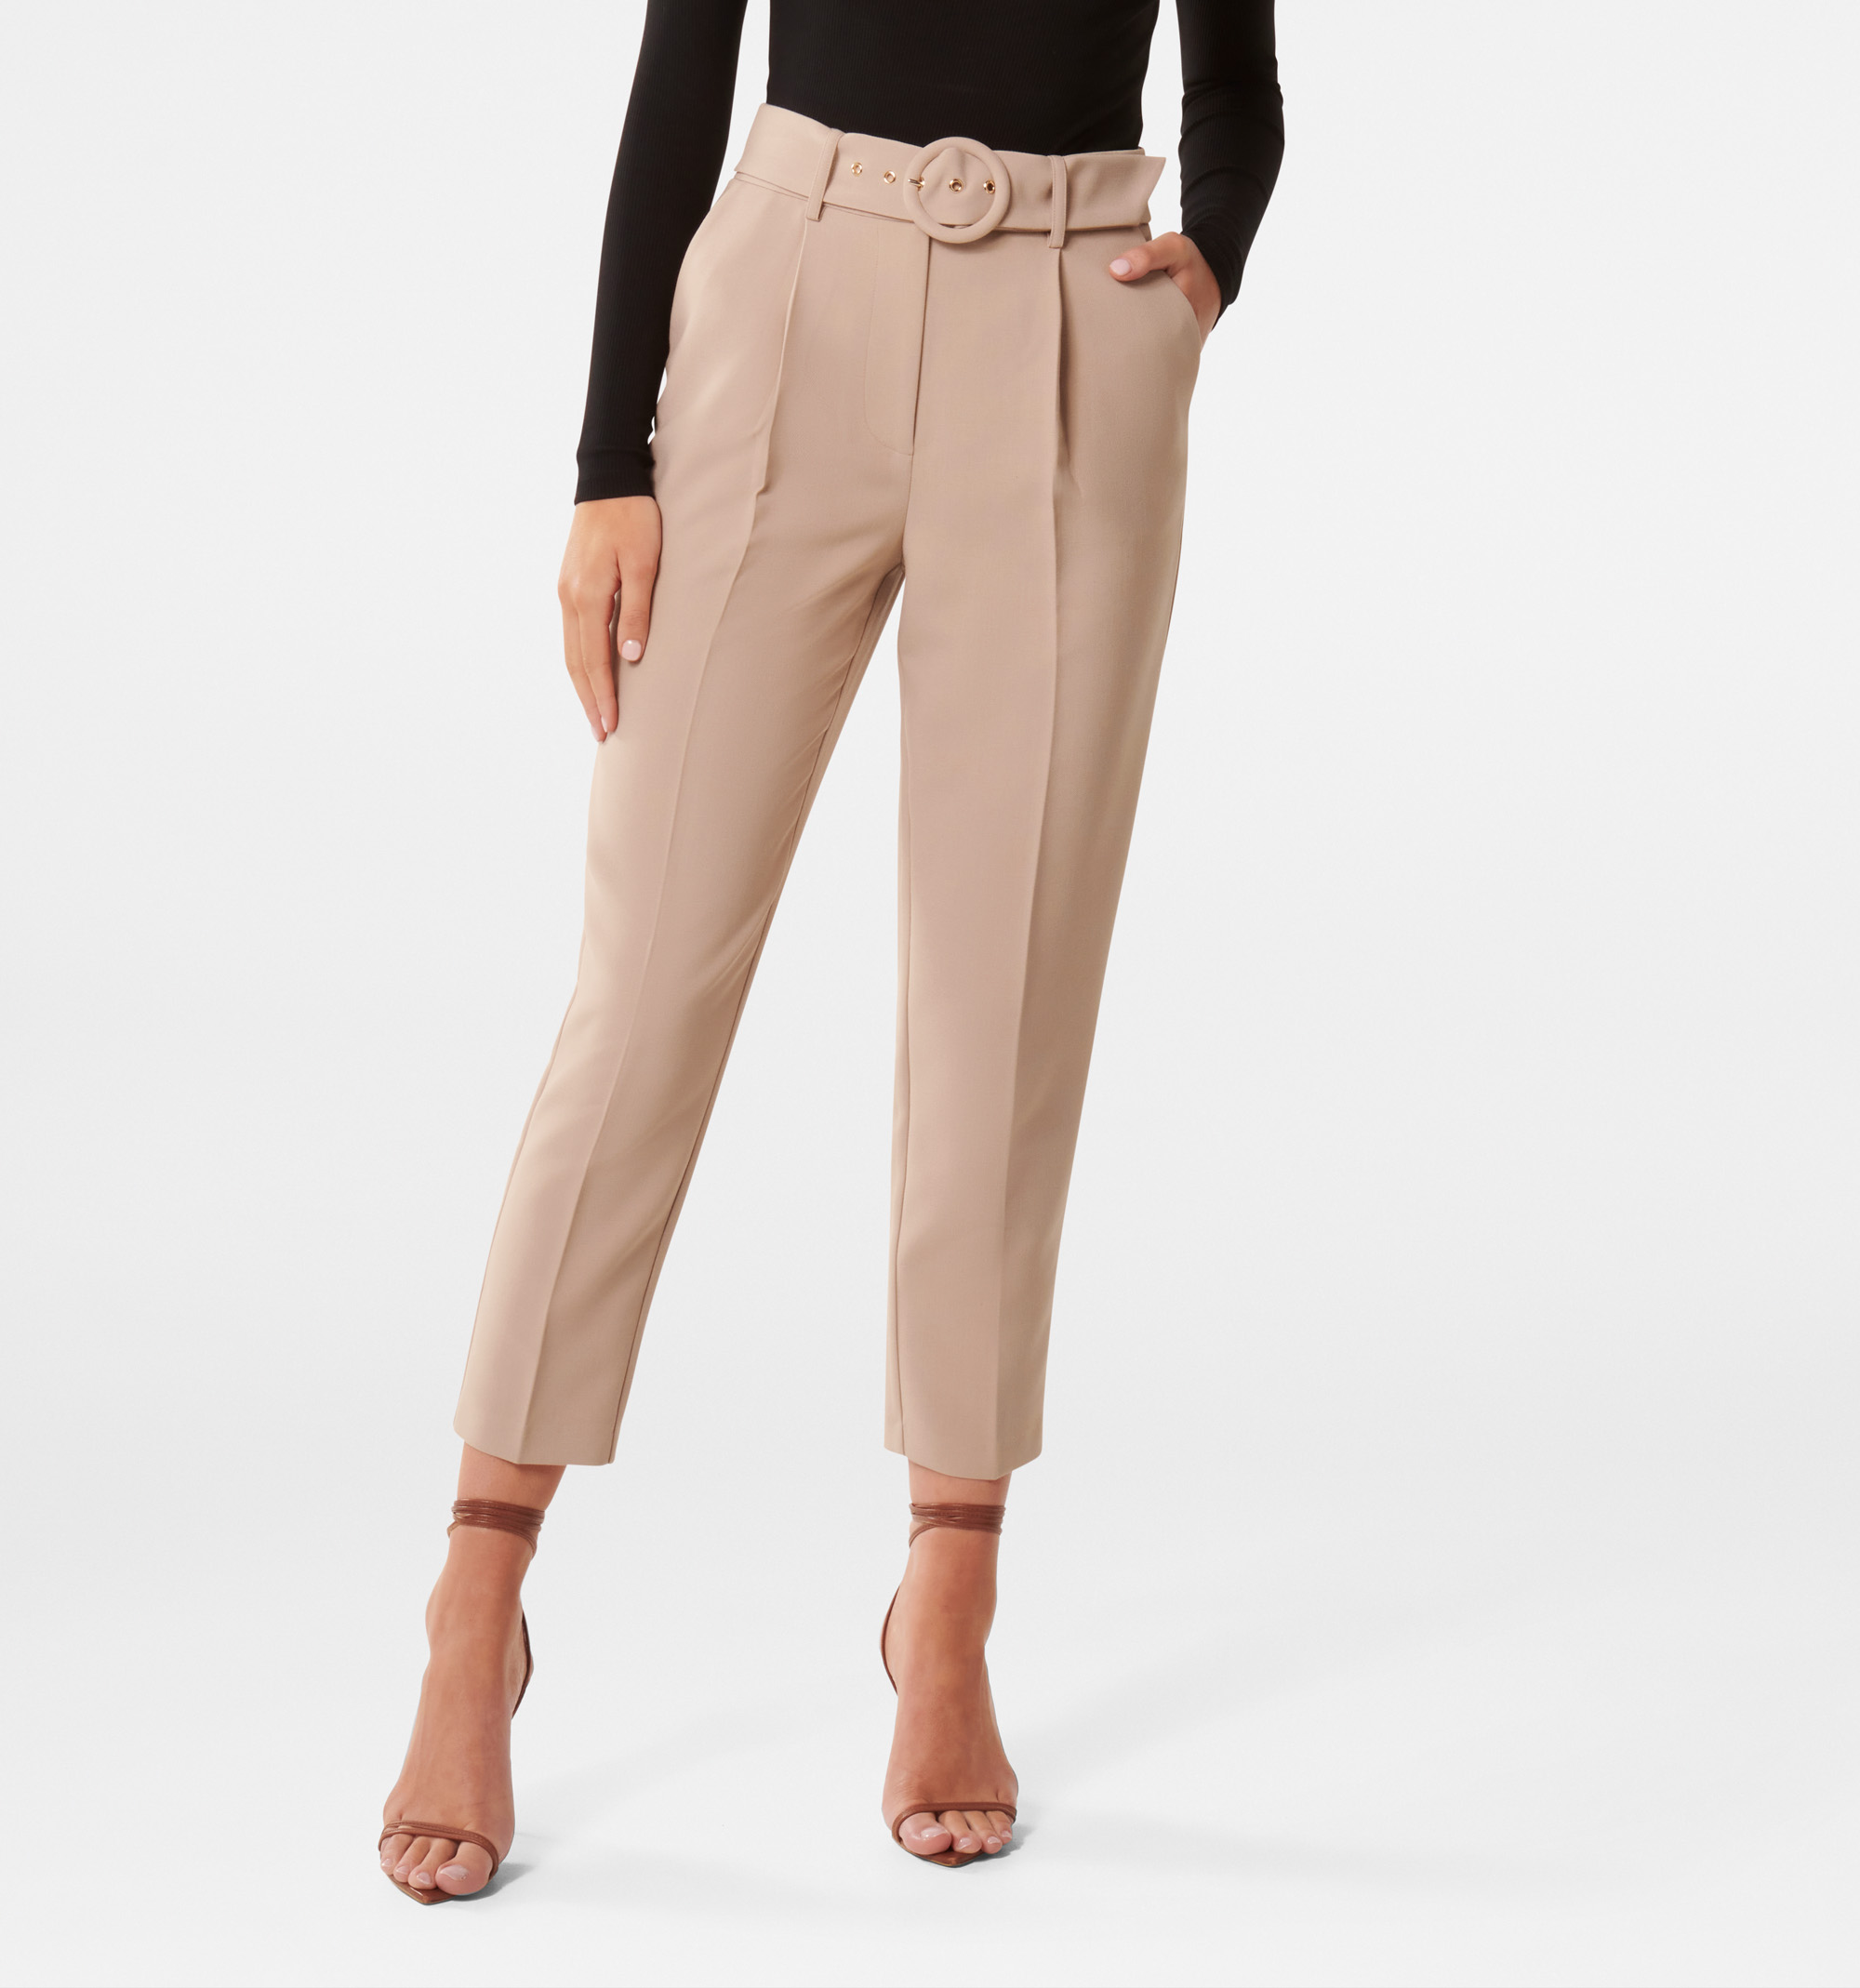 NWT FOREVER NEW Nylah High Waisted Wide Leg Pants | High waisted wide leg  pants, Wide leg pants, Forever new